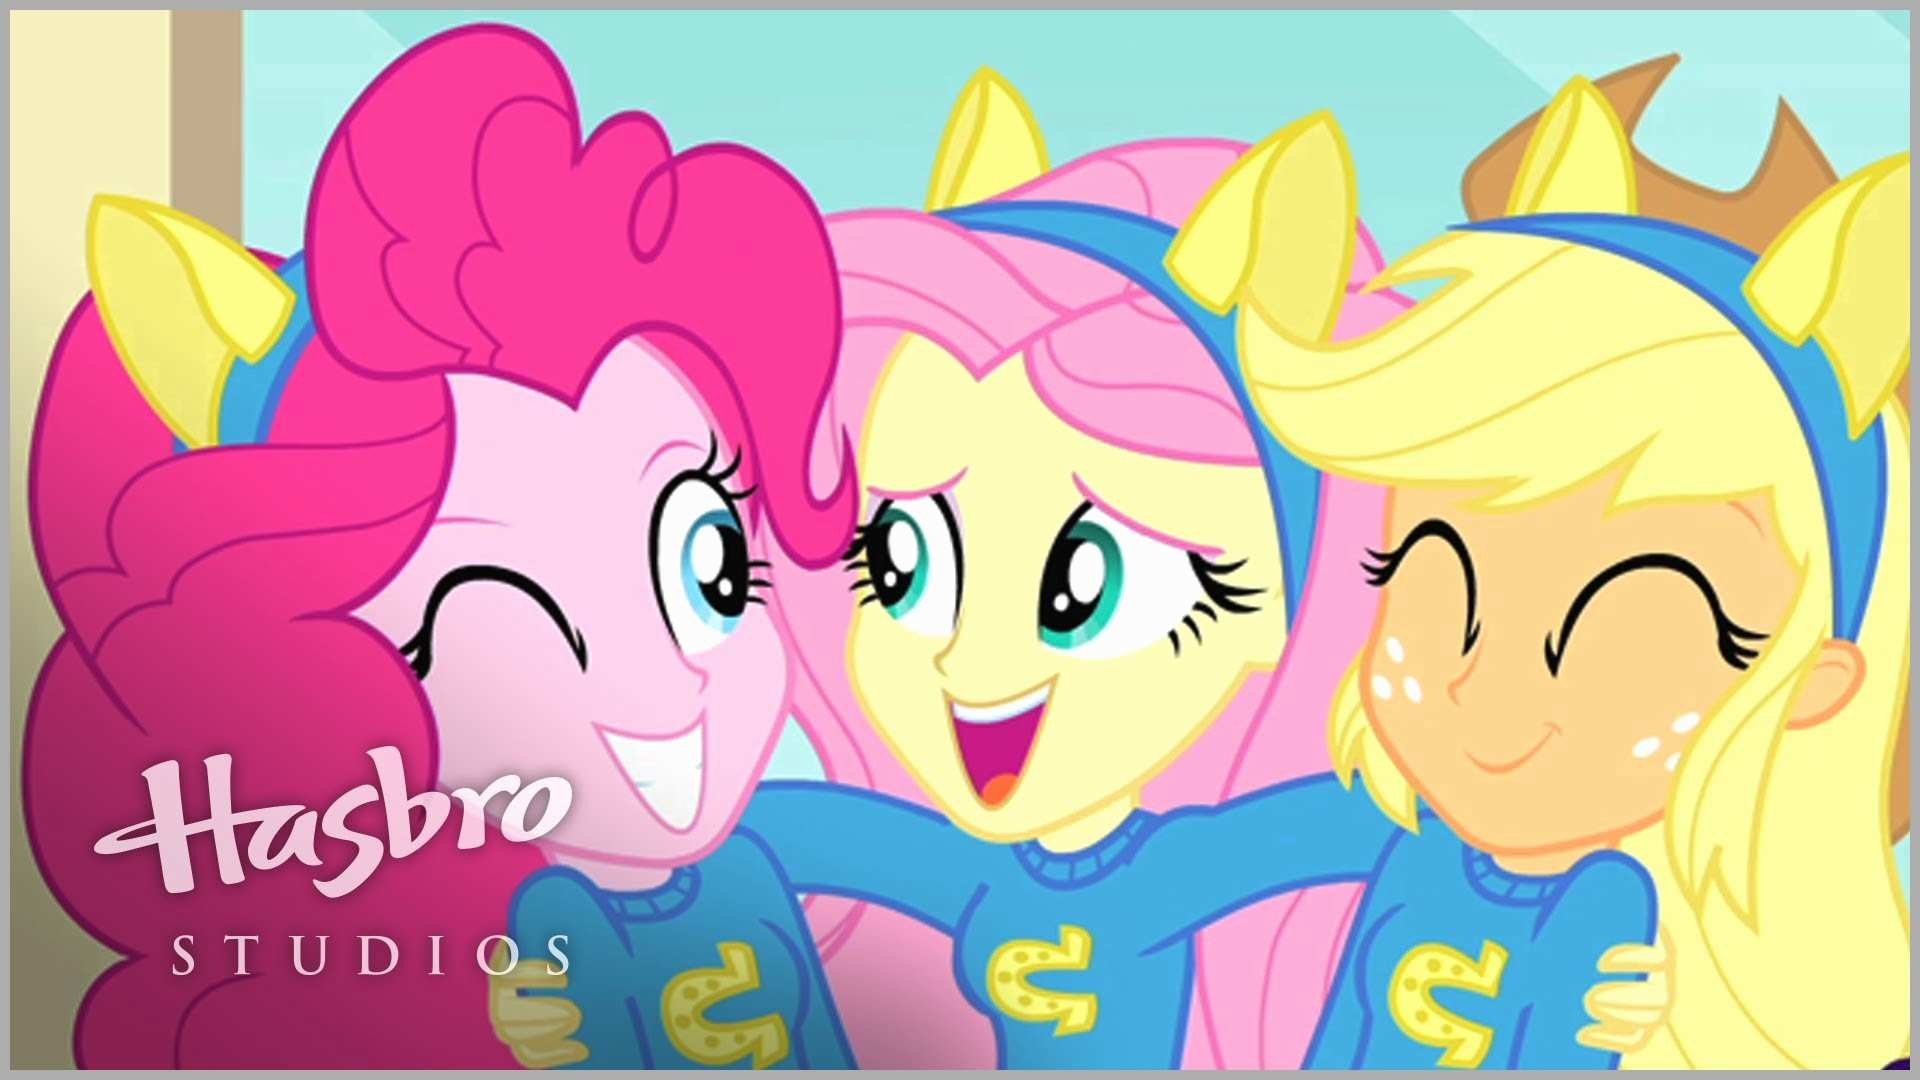 1920x1080 My Little Pony Wallpaper for Bedroom Luxury My Little Pony Equestria Girls  Cafeteria song Music Video